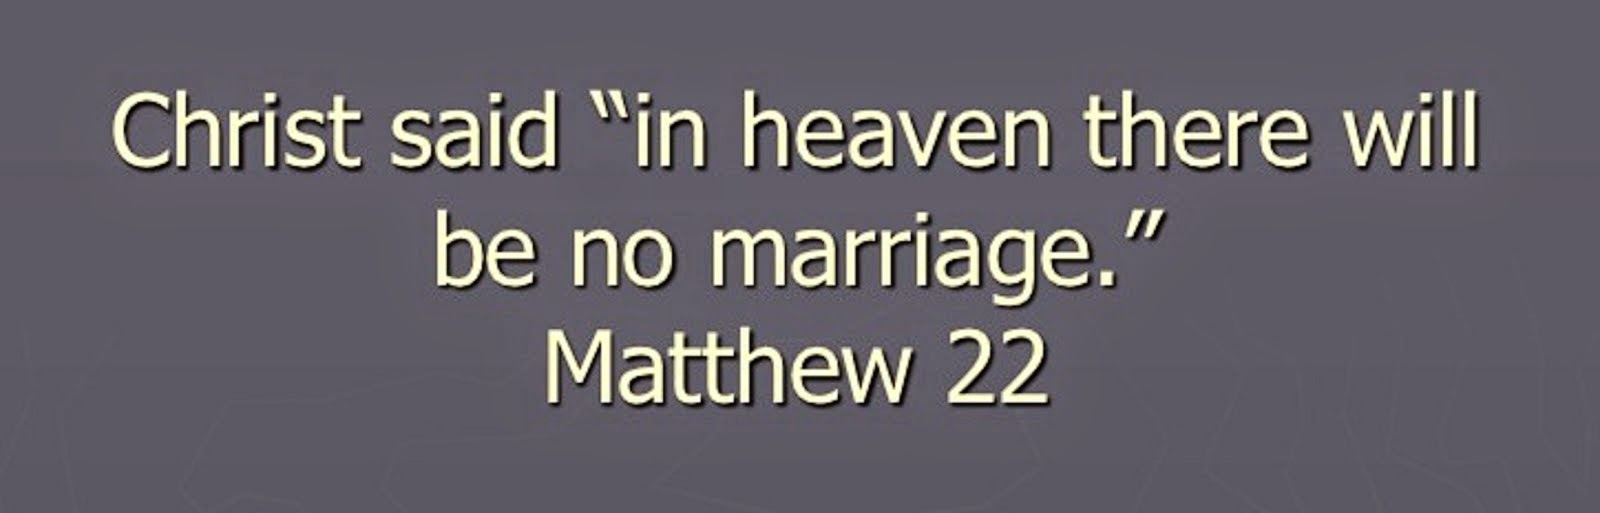 CHRIST SAID, "IN HEAVEN THERE WILL BE NO MARRIAGE." MATTHEW: 22